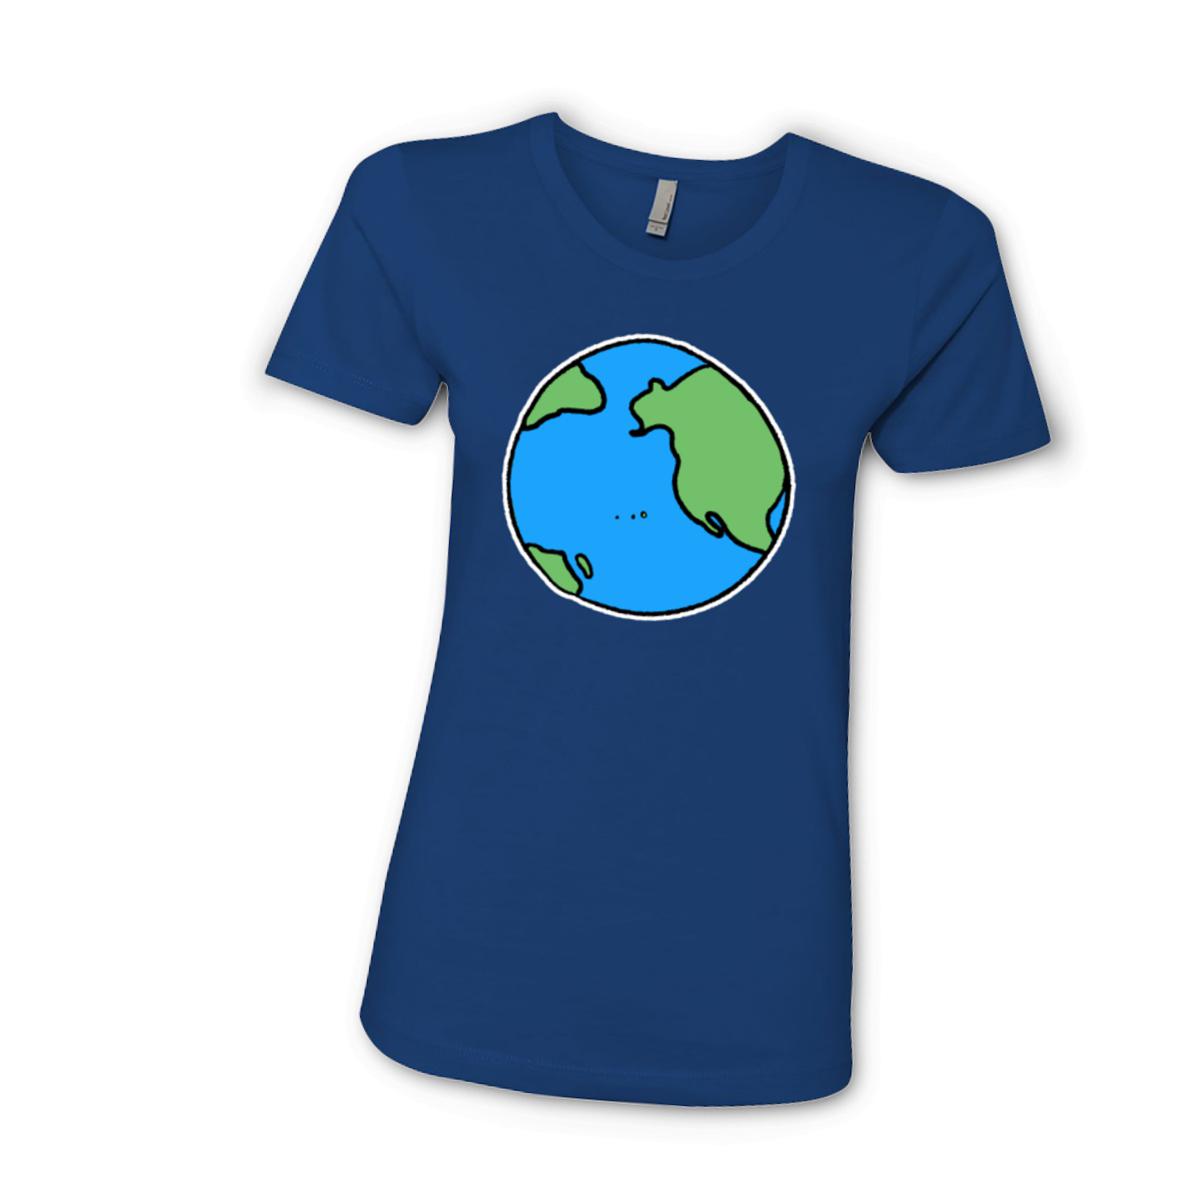 Earth Ladies' Boyfriend Tee Double Extra Large royal-blue